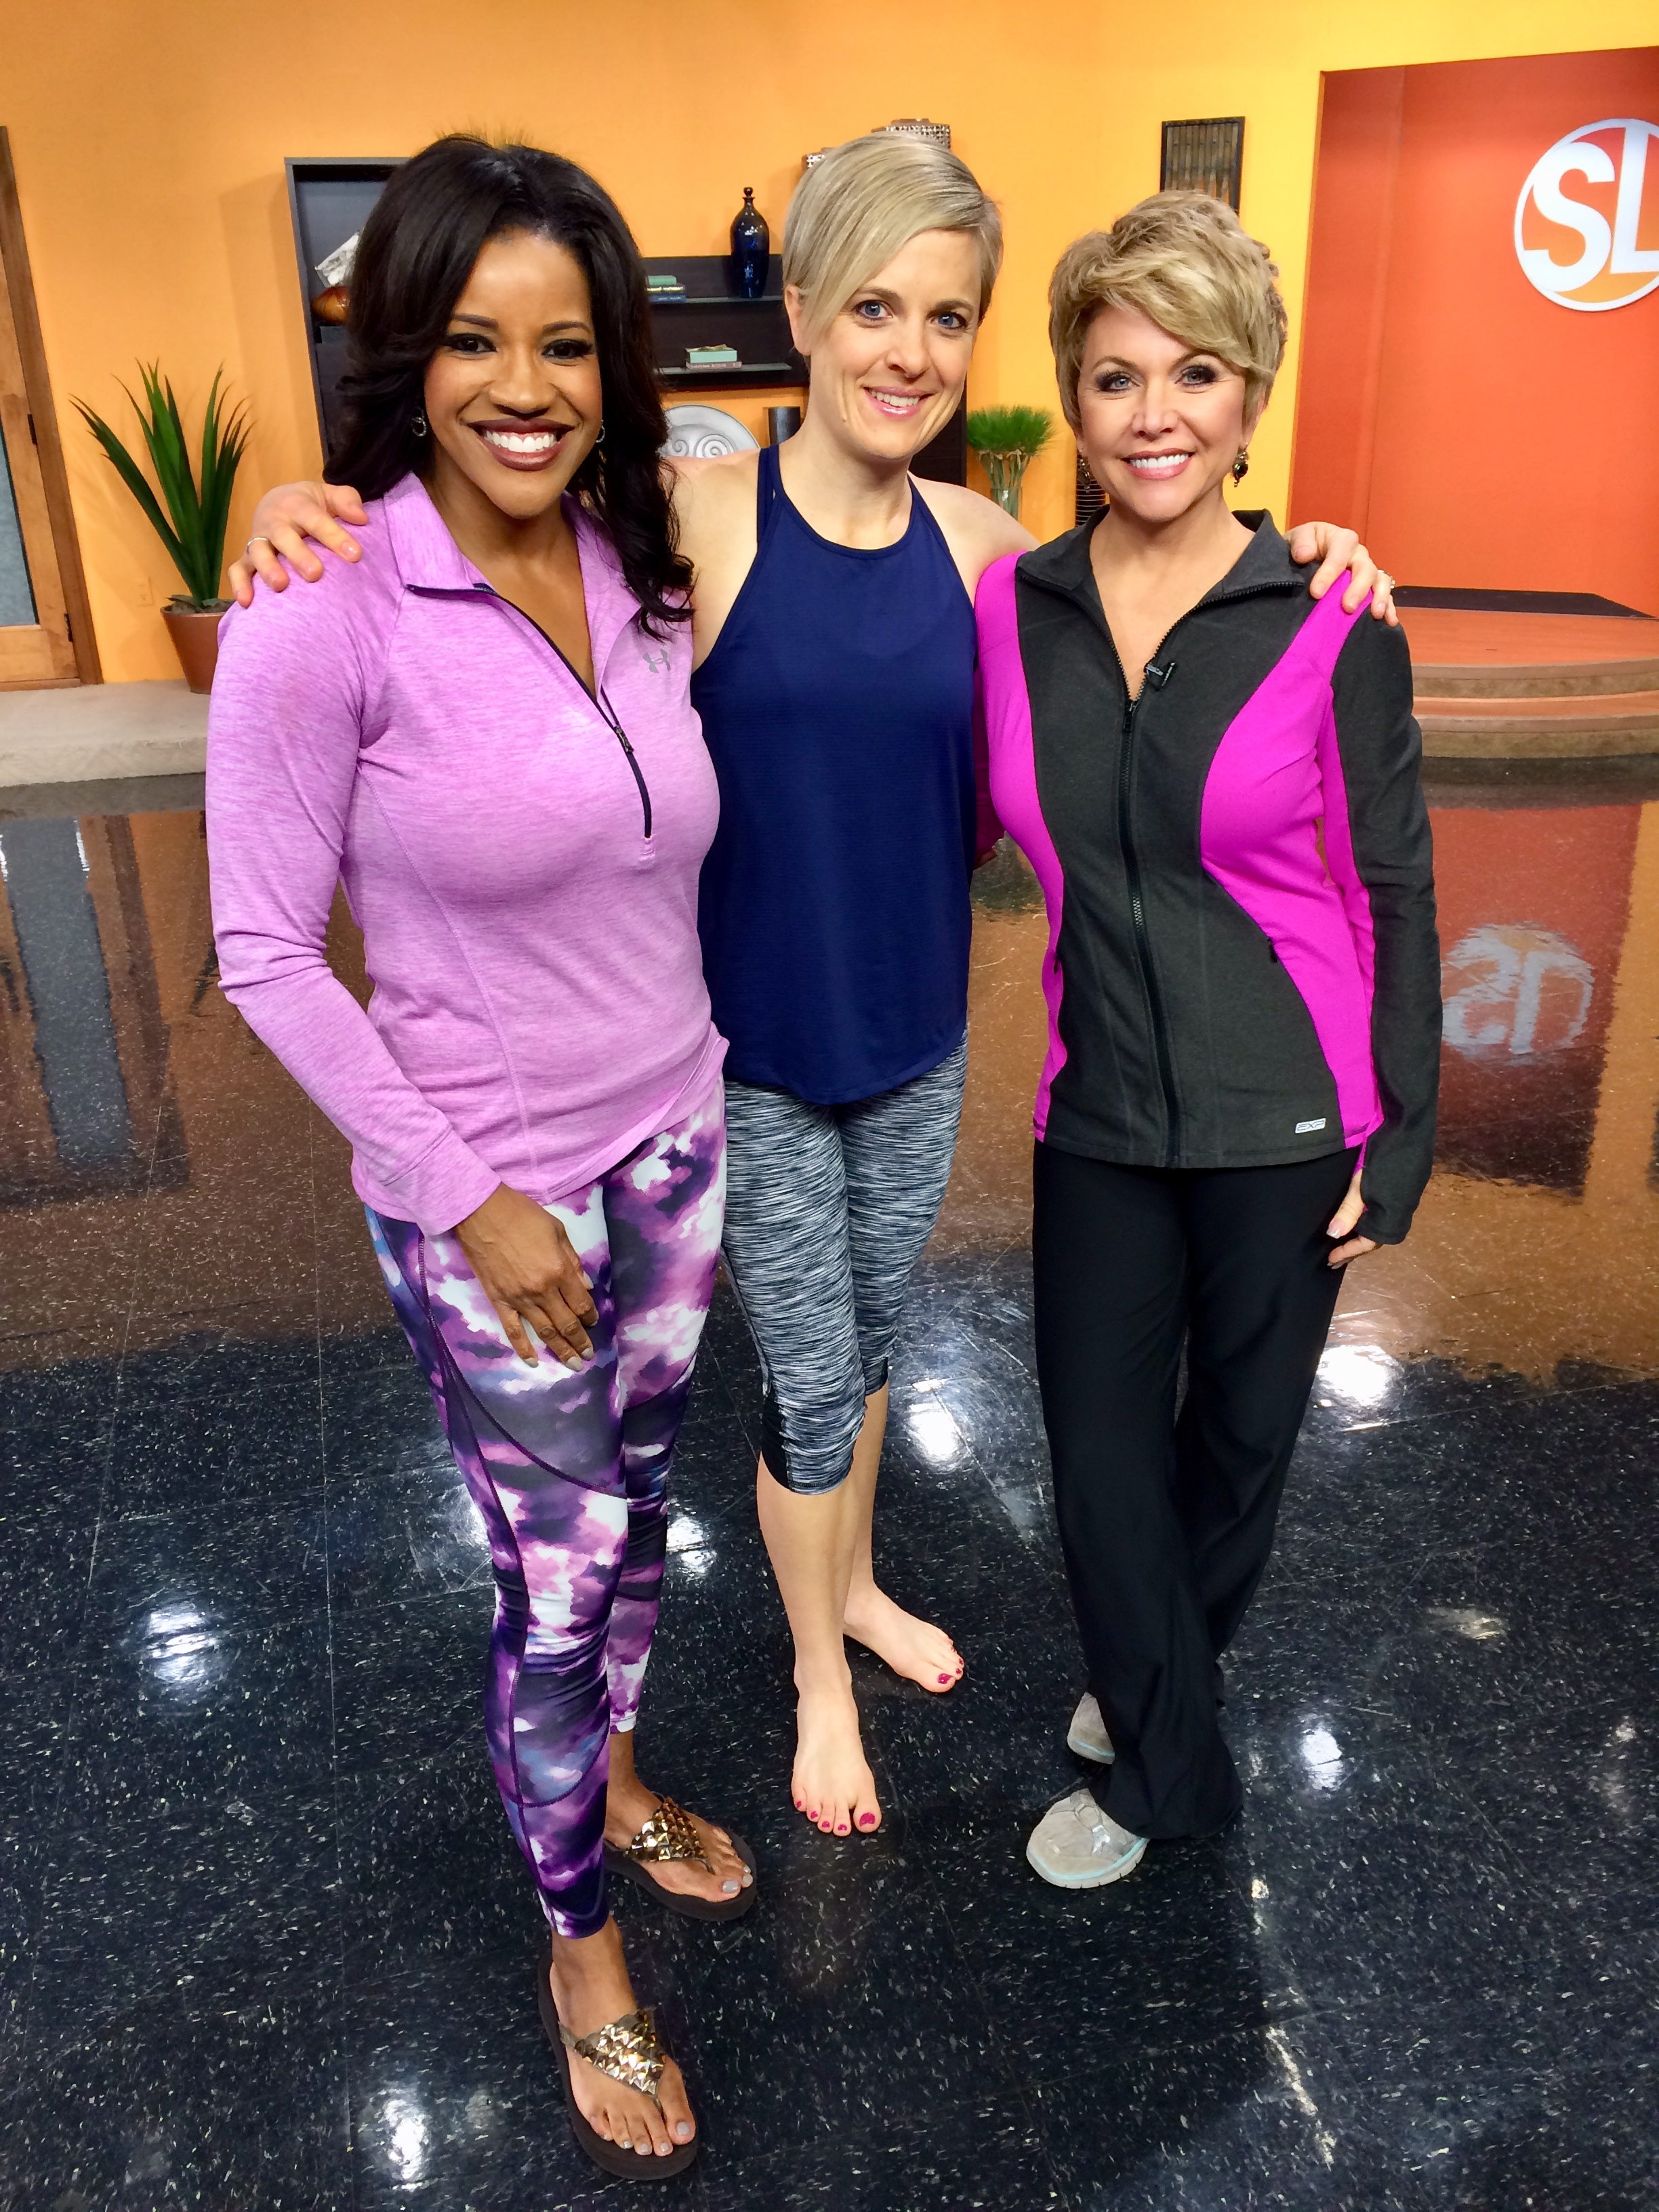 3 Yoga Poses That Help Lower Anxiety & Increase Energy For The Holidays-ABC15 Sonoran Living 1